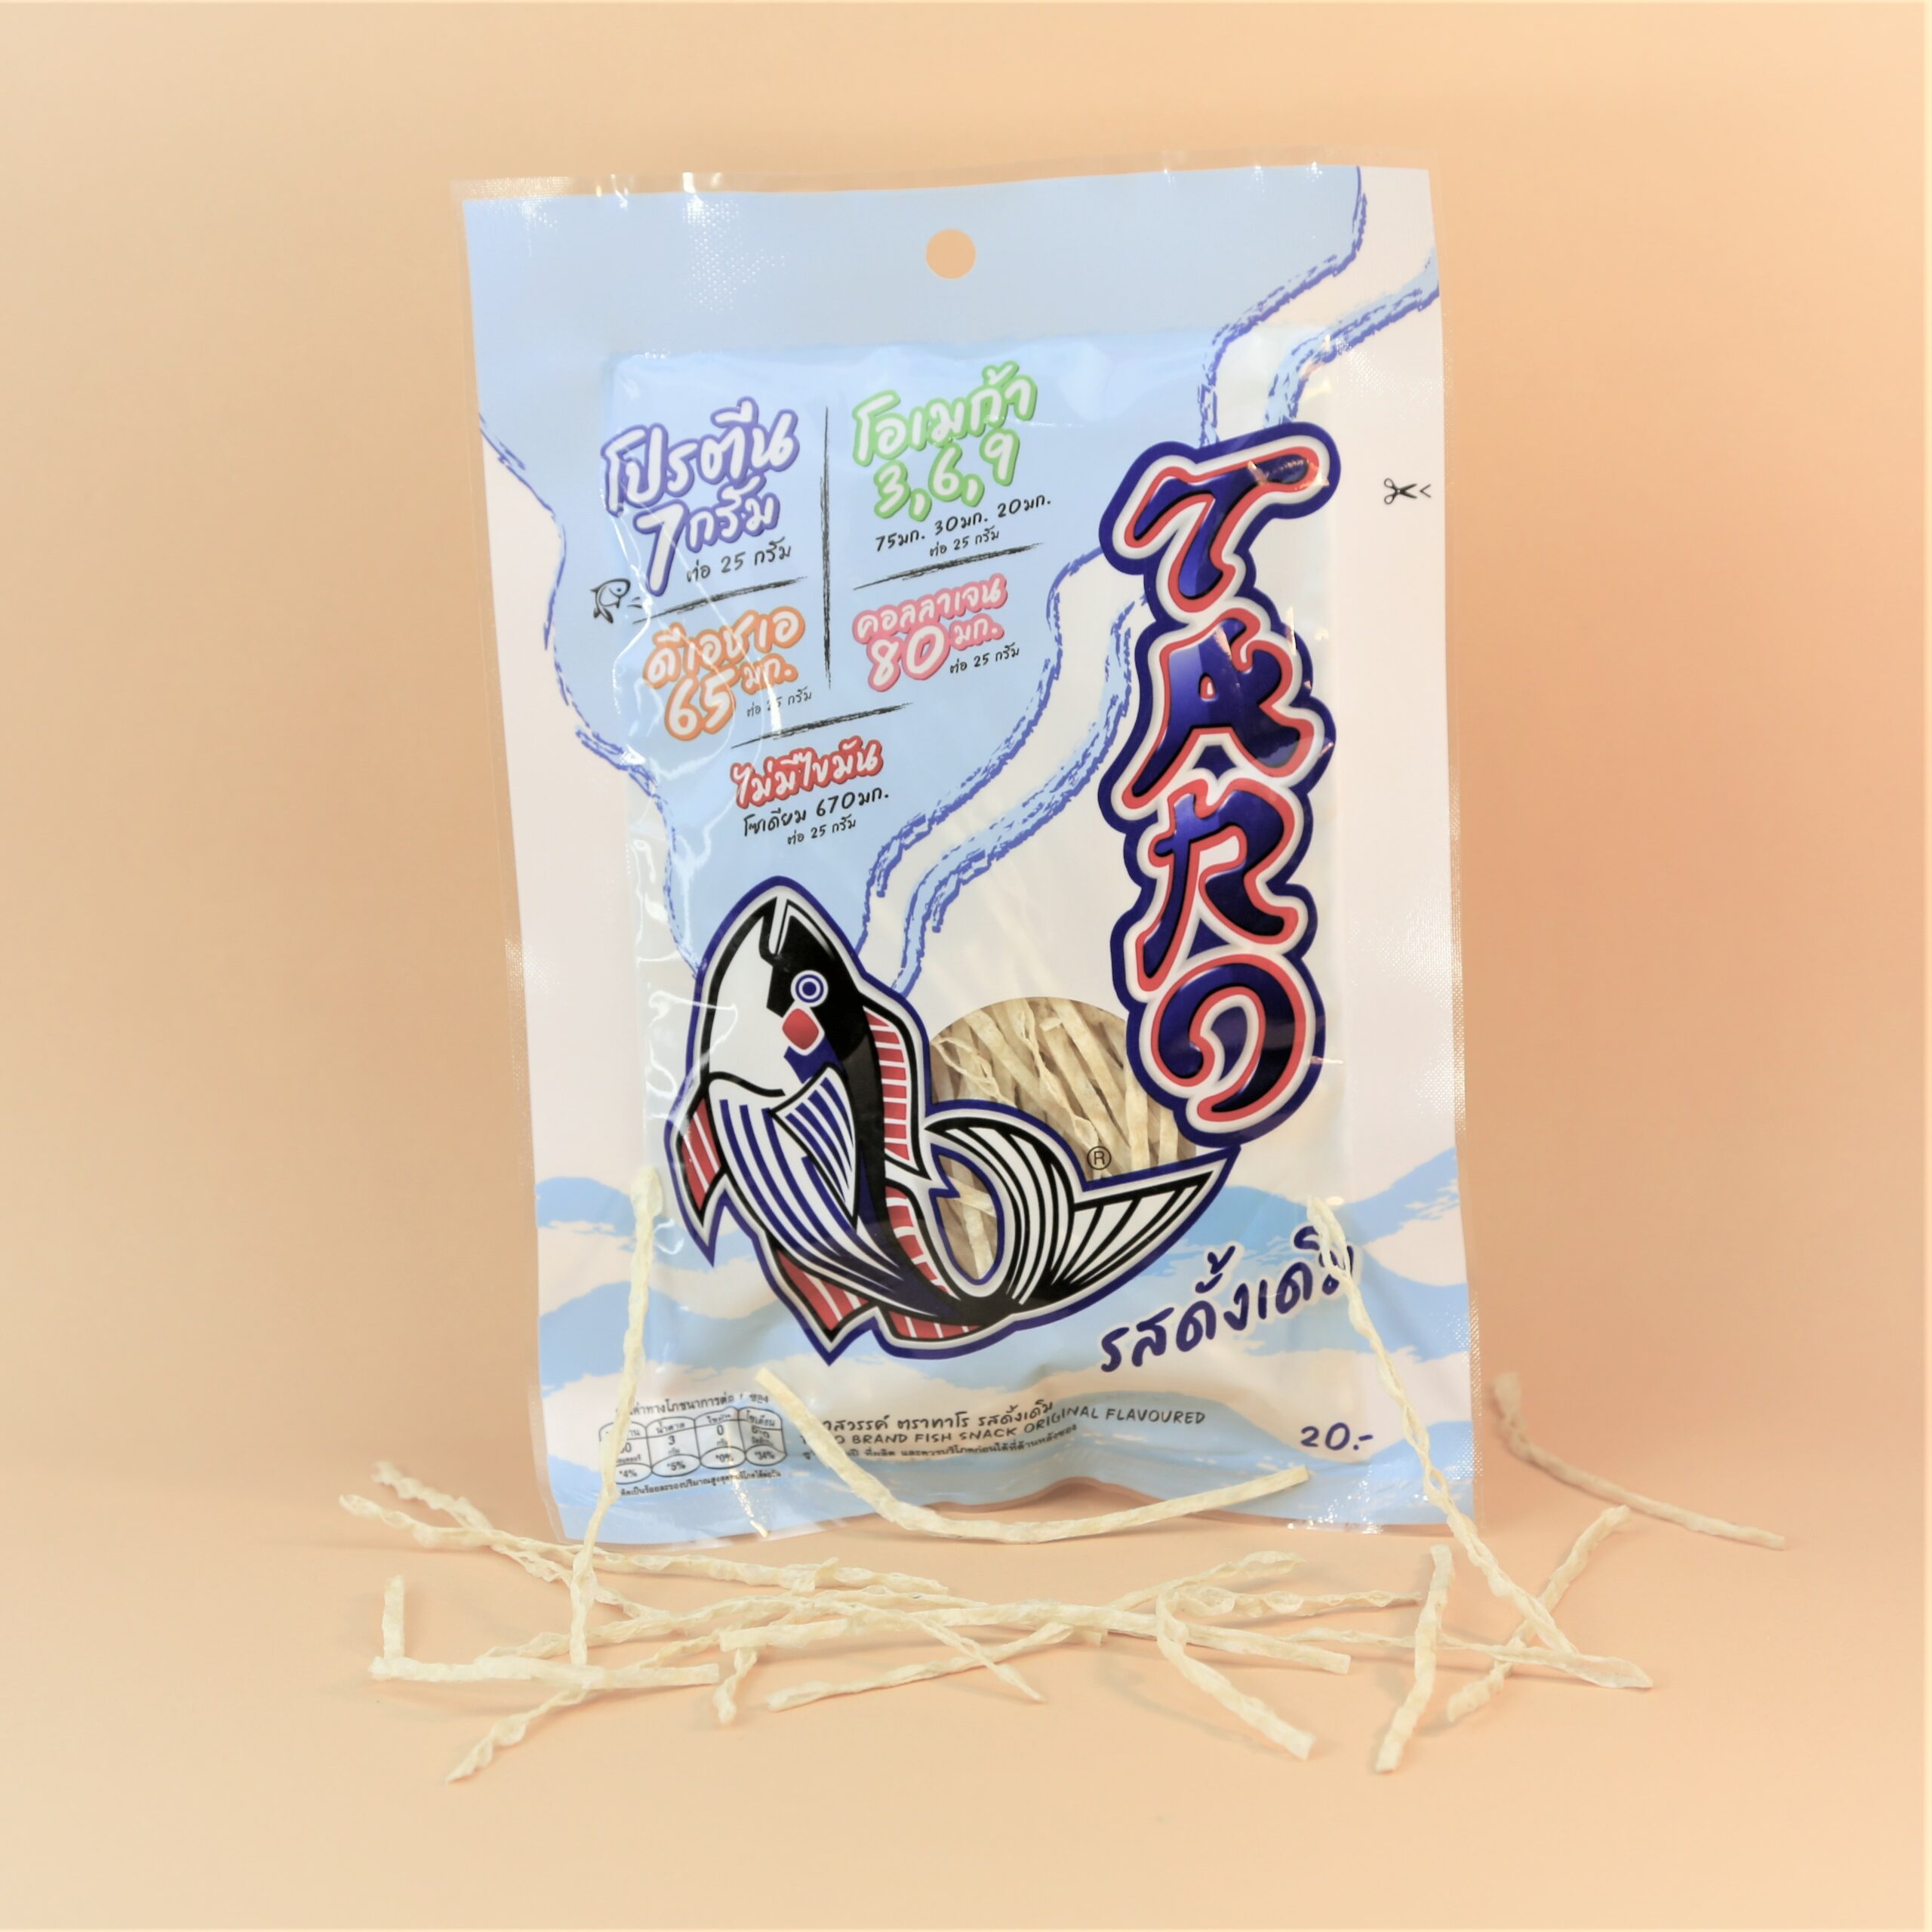 Taro Fish snack is Thai people's favorite savory snack. White stripes of fish snack in blue and white packaging